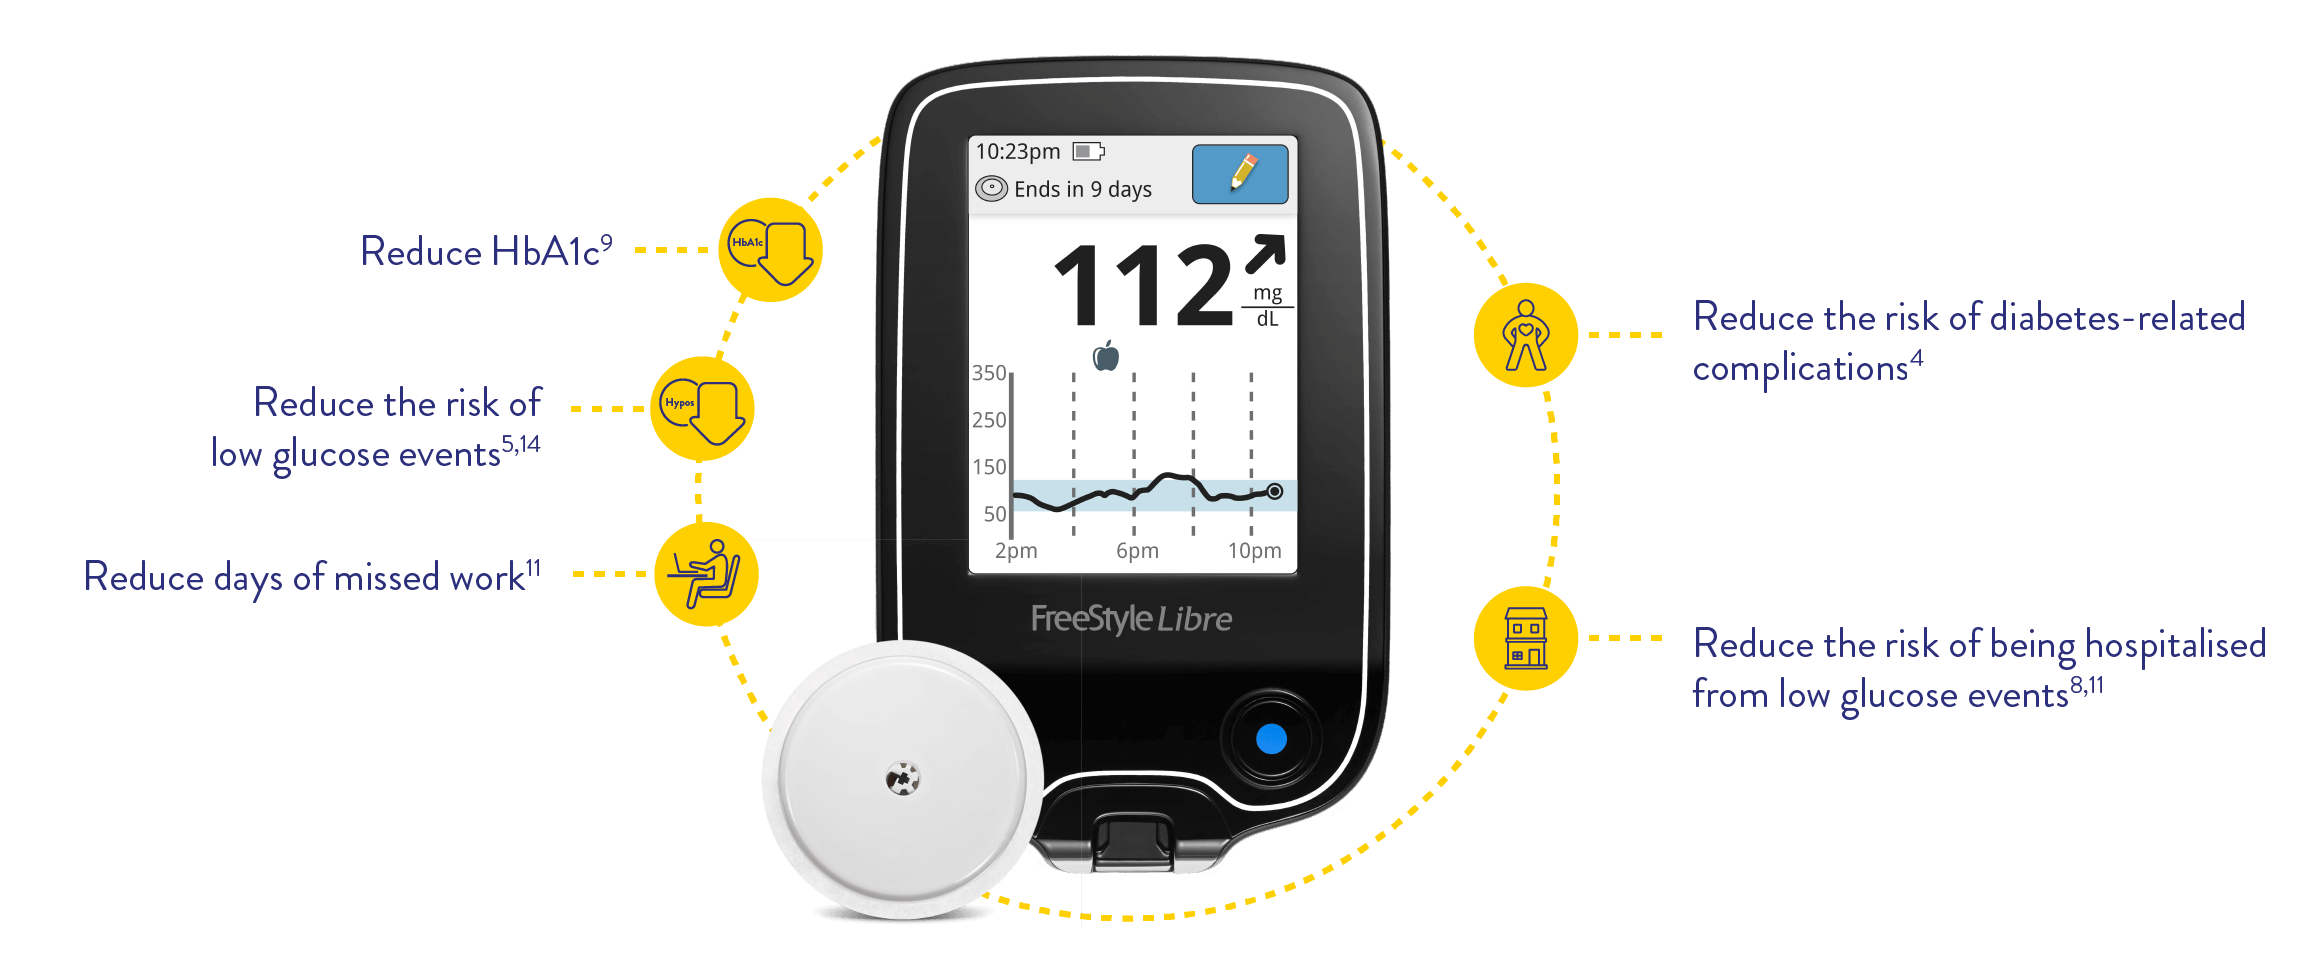 The handheld reader and glucose sensor surrounded by the 5 benefits of monitoring your glucose with FreeStyle Libre - Reduce HbA1c  - Reduce the risk of hypos  - Reduce days of missed work - Reduce risk of diabetes-related complications - Reduce the risk of being hospitalised from a hypo